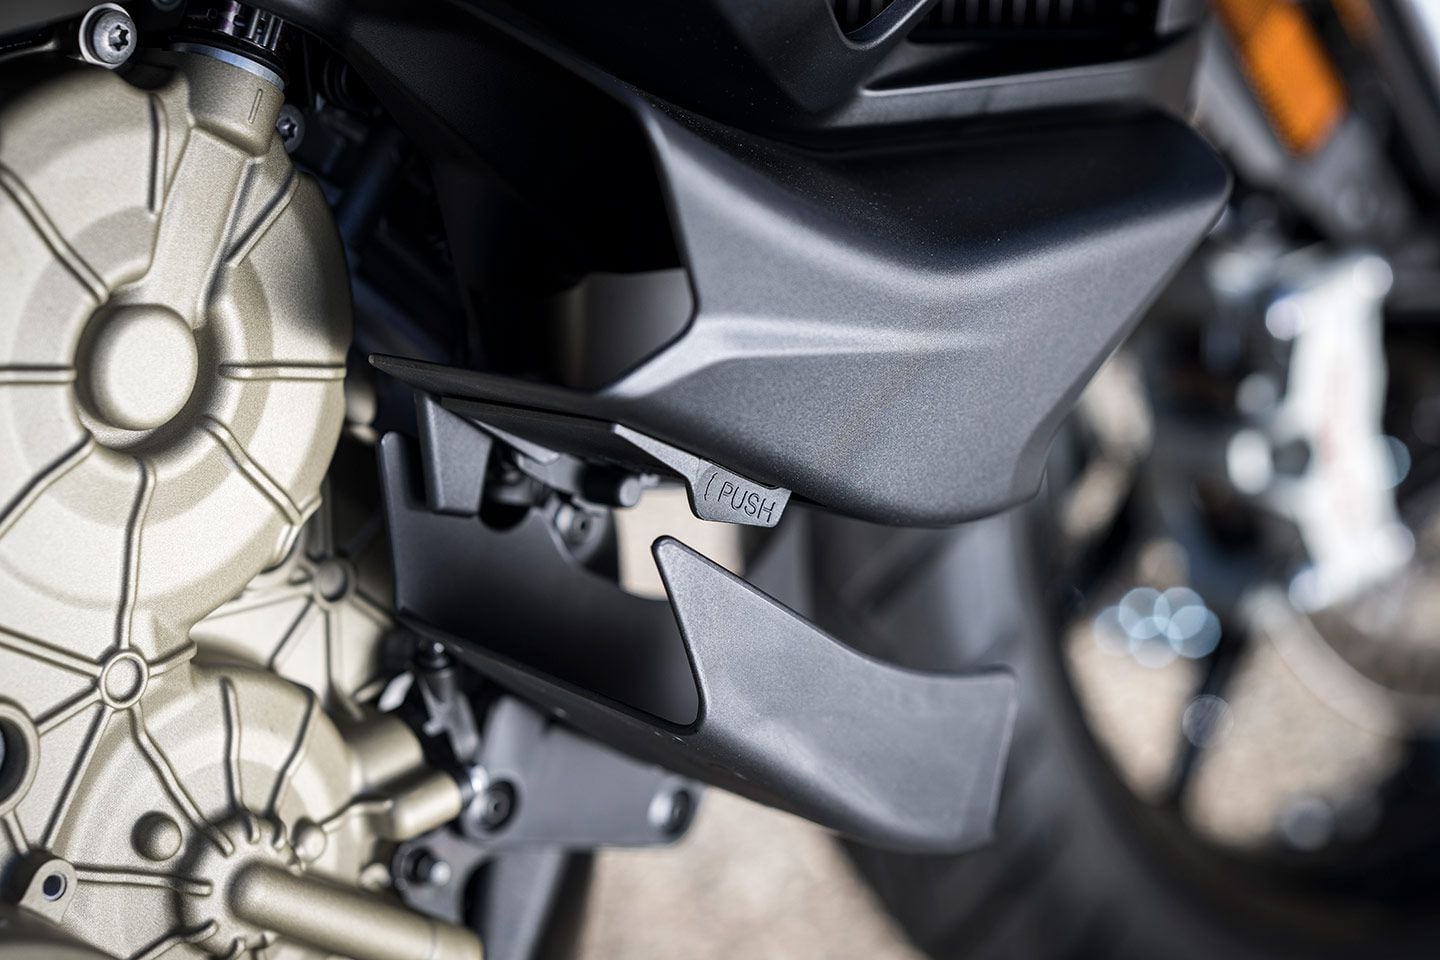 Adjustable air scoops direct cooling air to the rider’s lower extremities.